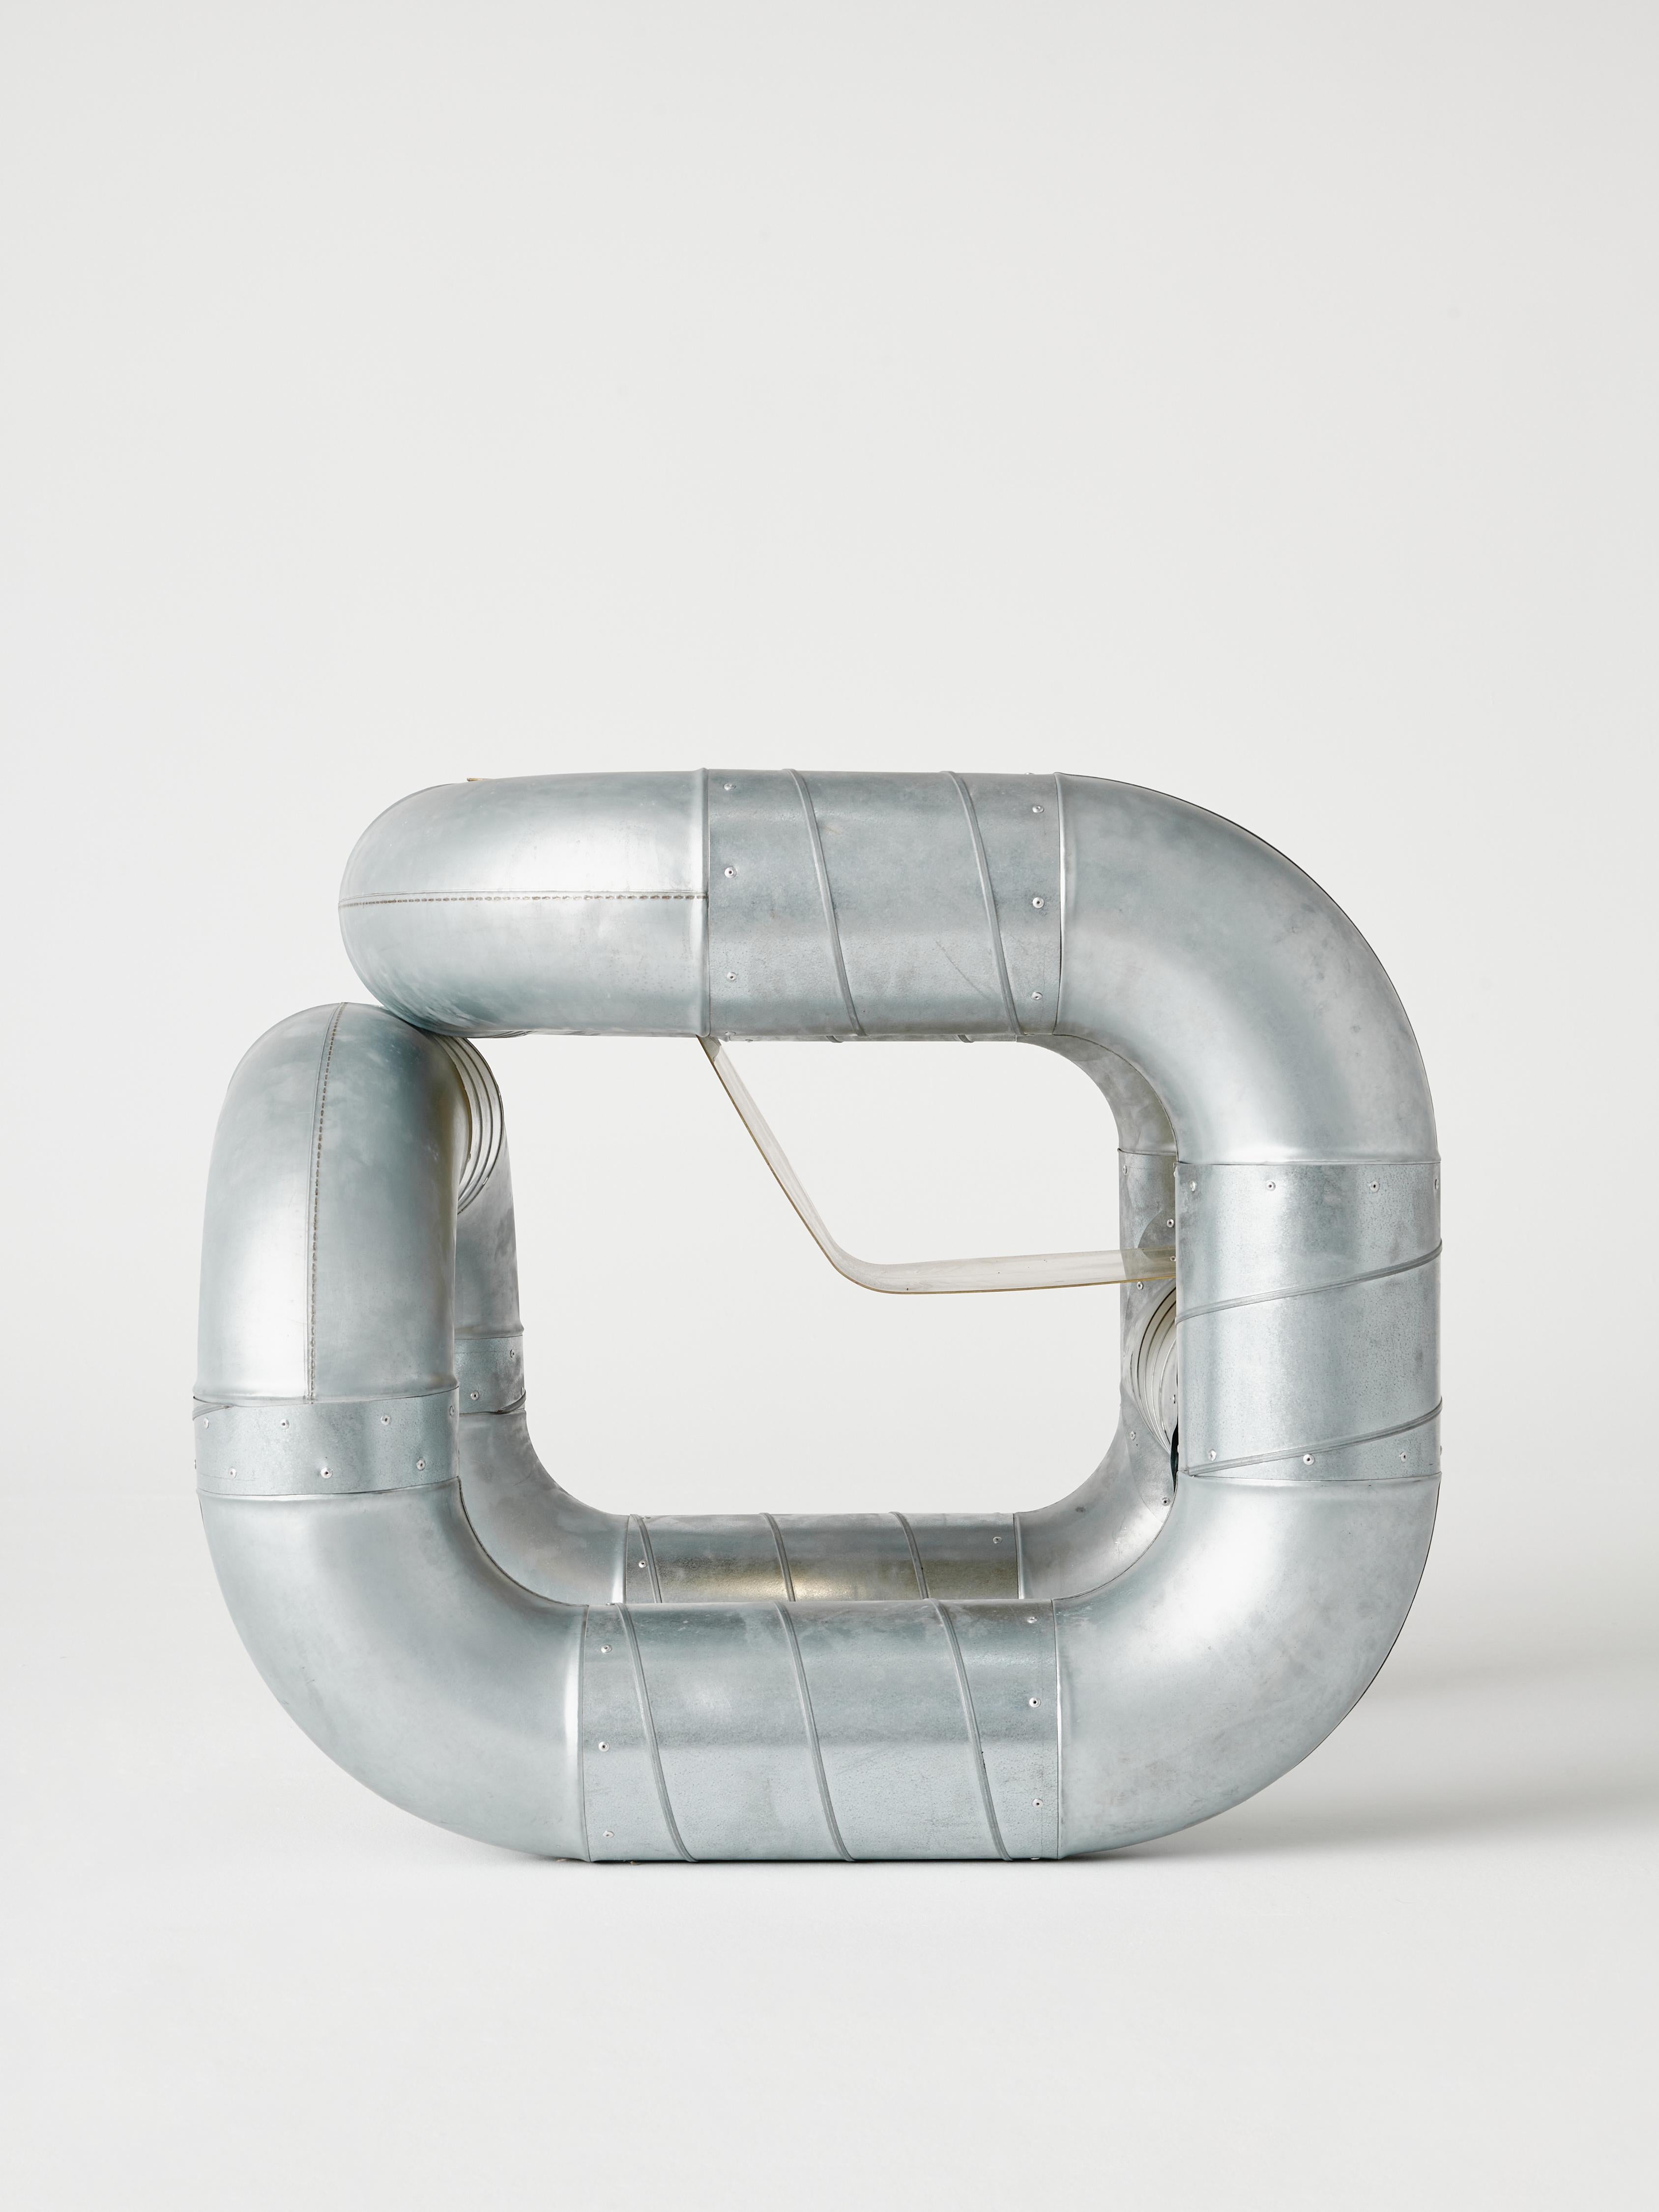 This tubular steel armchair forms part of the Series O.F.I.S (Objects From Intersticial Space), an ongoing research of industrial material's potential for narrative. Muñoz designed this tubular armchair as an exploration of the structural potential